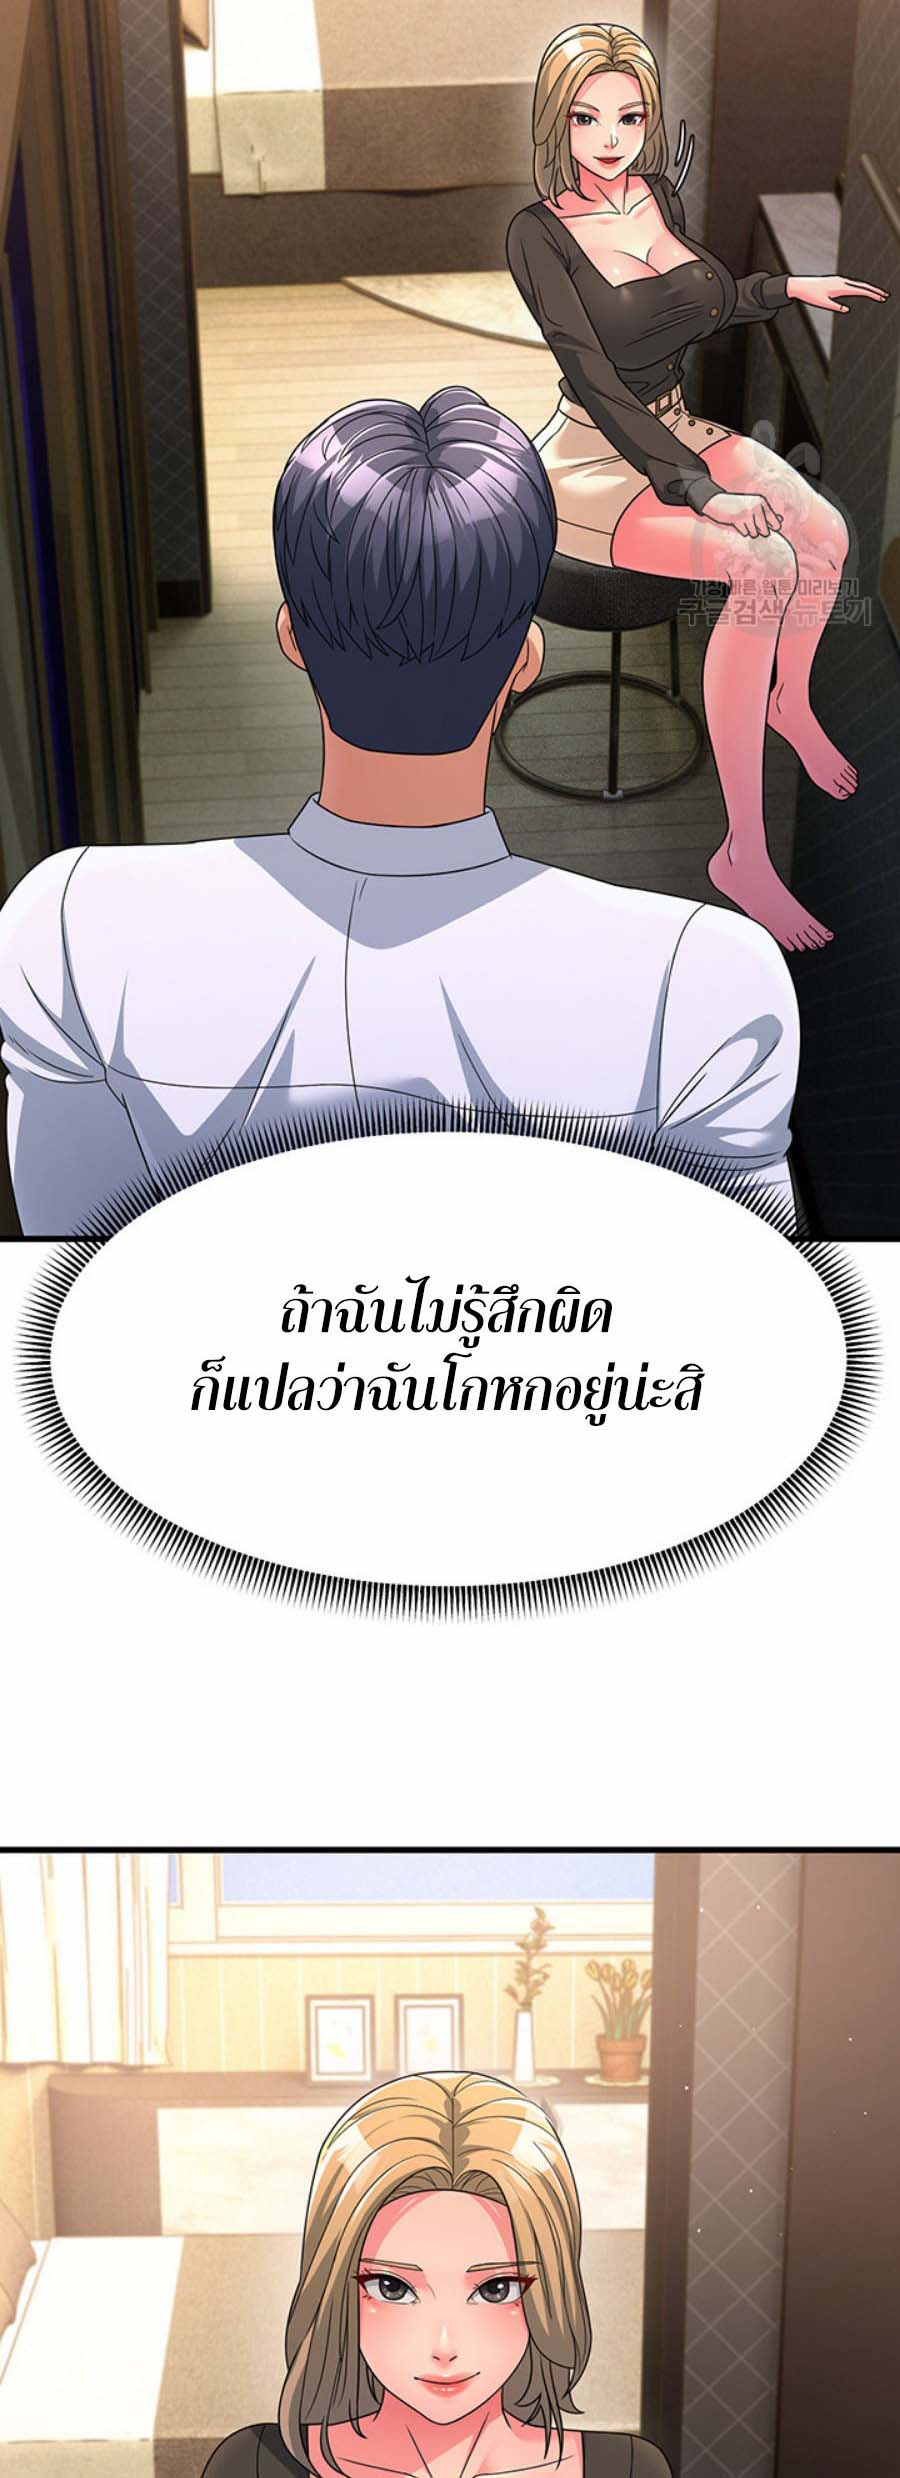 à¸­à¹ˆà¸²à¸™à¹‚à¸”à¸ˆà¸´à¸™ à¹€à¸£à¸·à¹ˆà¸­à¸‡ Mother in Law Bends To My Will 8 23